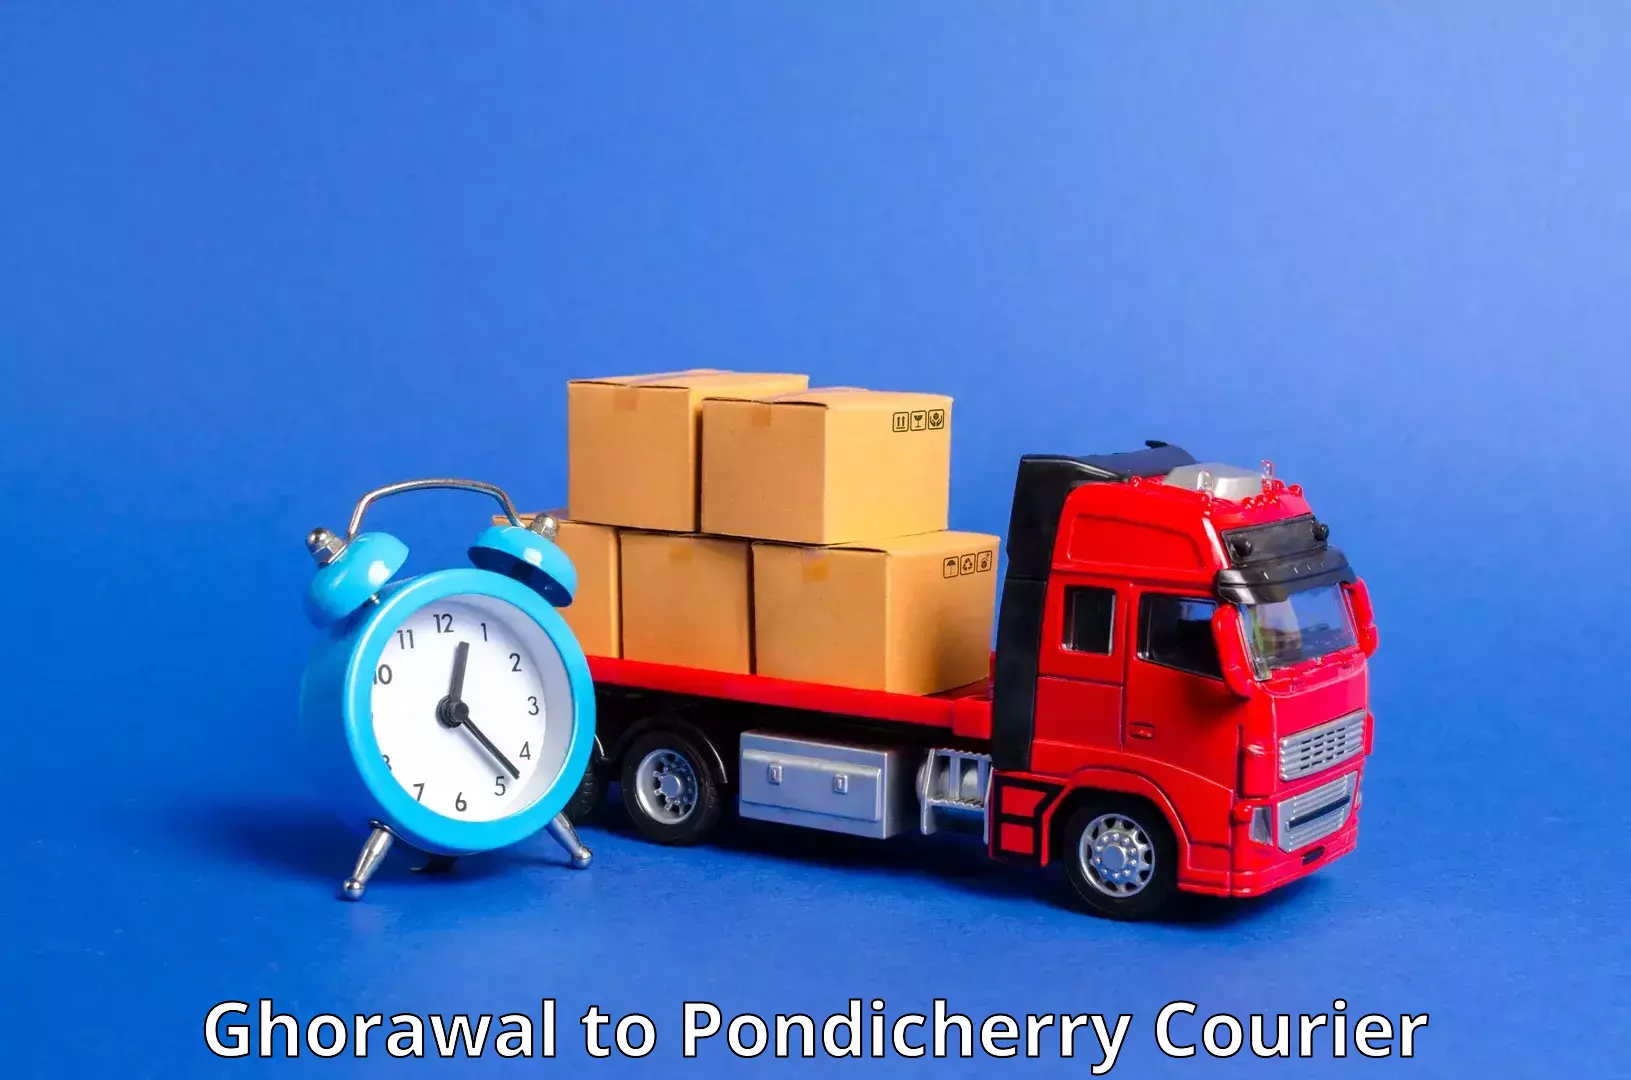 Reliable logistics providers Ghorawal to Pondicherry